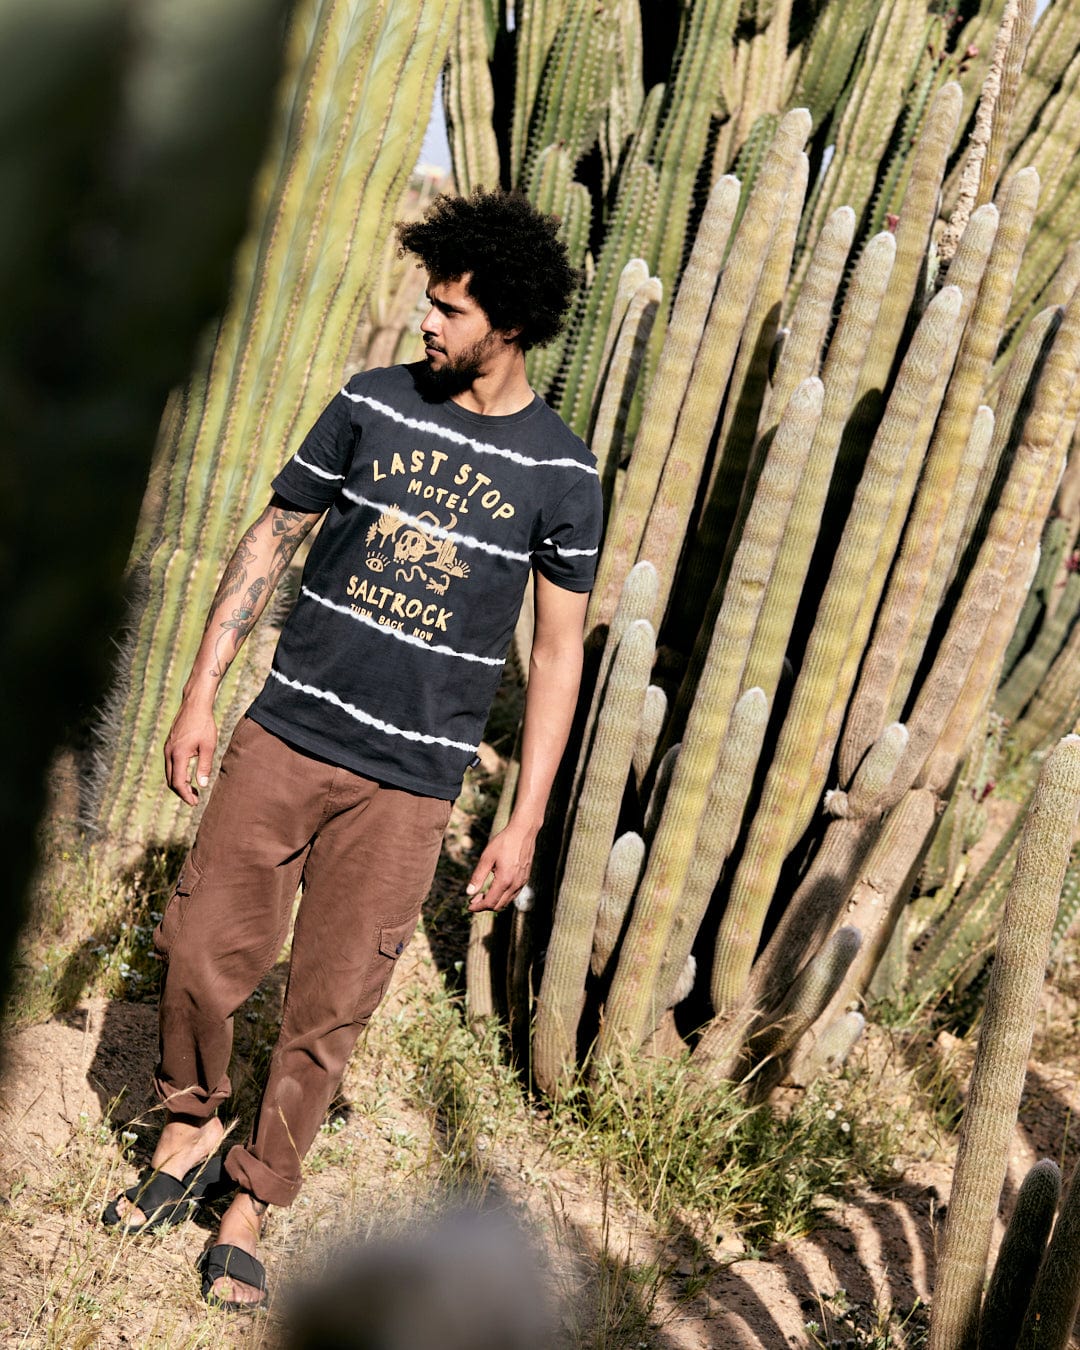 Man with an afro wearing a Last Stop Motel - Mens Short Sleeve Tie Dye T-Shirt in Dark Grey with crew neckline and brown pants standing near tall cacti in a sunny outdoor setting. (Brand: Saltrock)